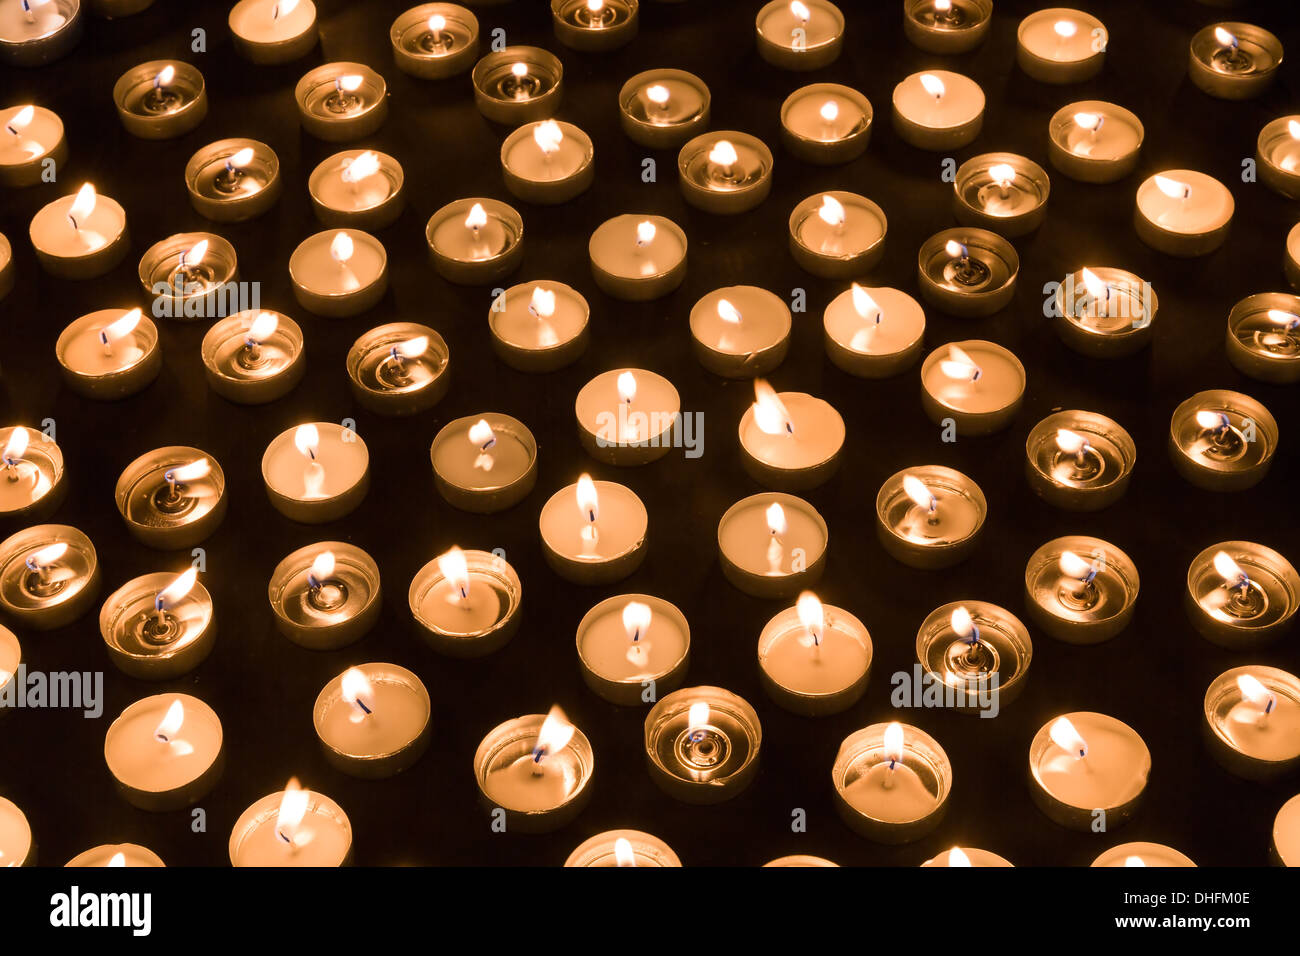 Large group of burning candles at a black background Stock Photo